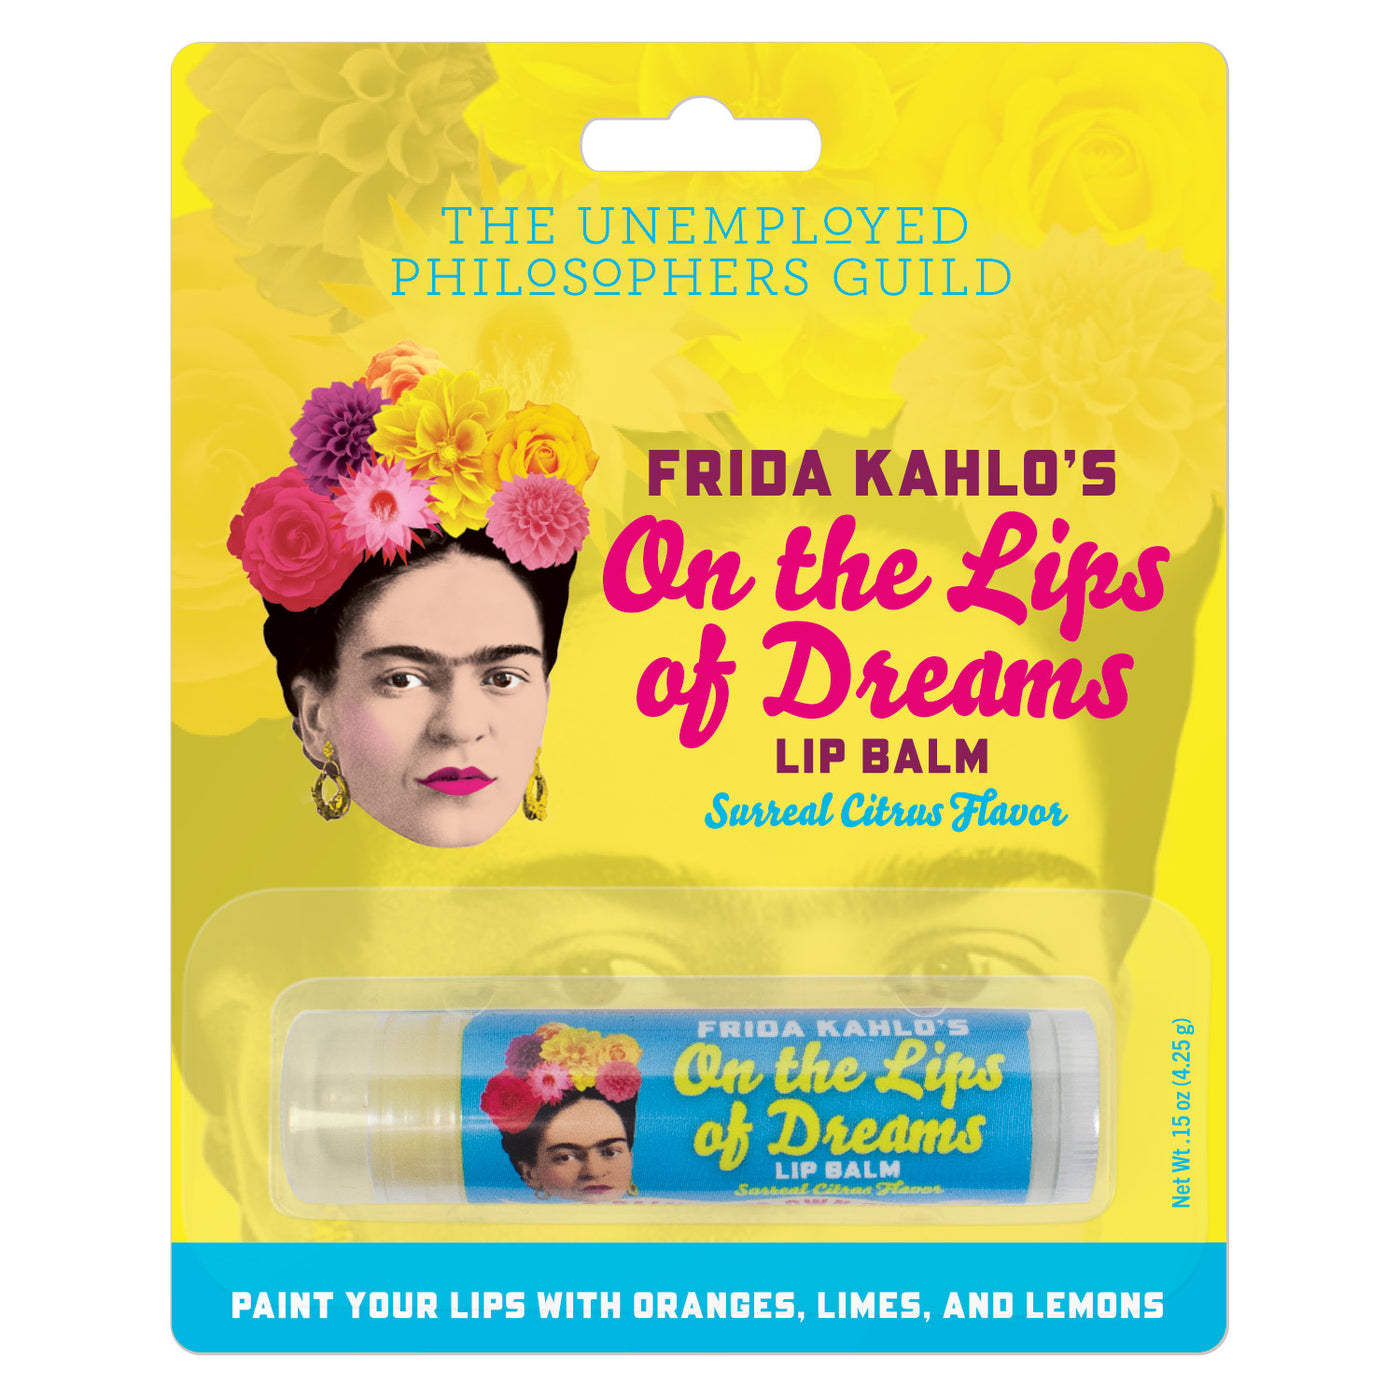 Frida Kahlo's On the Lips of Dreams lip balm in branded packaging. Lip balm is citrus flavored. Lip balm stick features Frida Kahlo wearing a flower crown. 